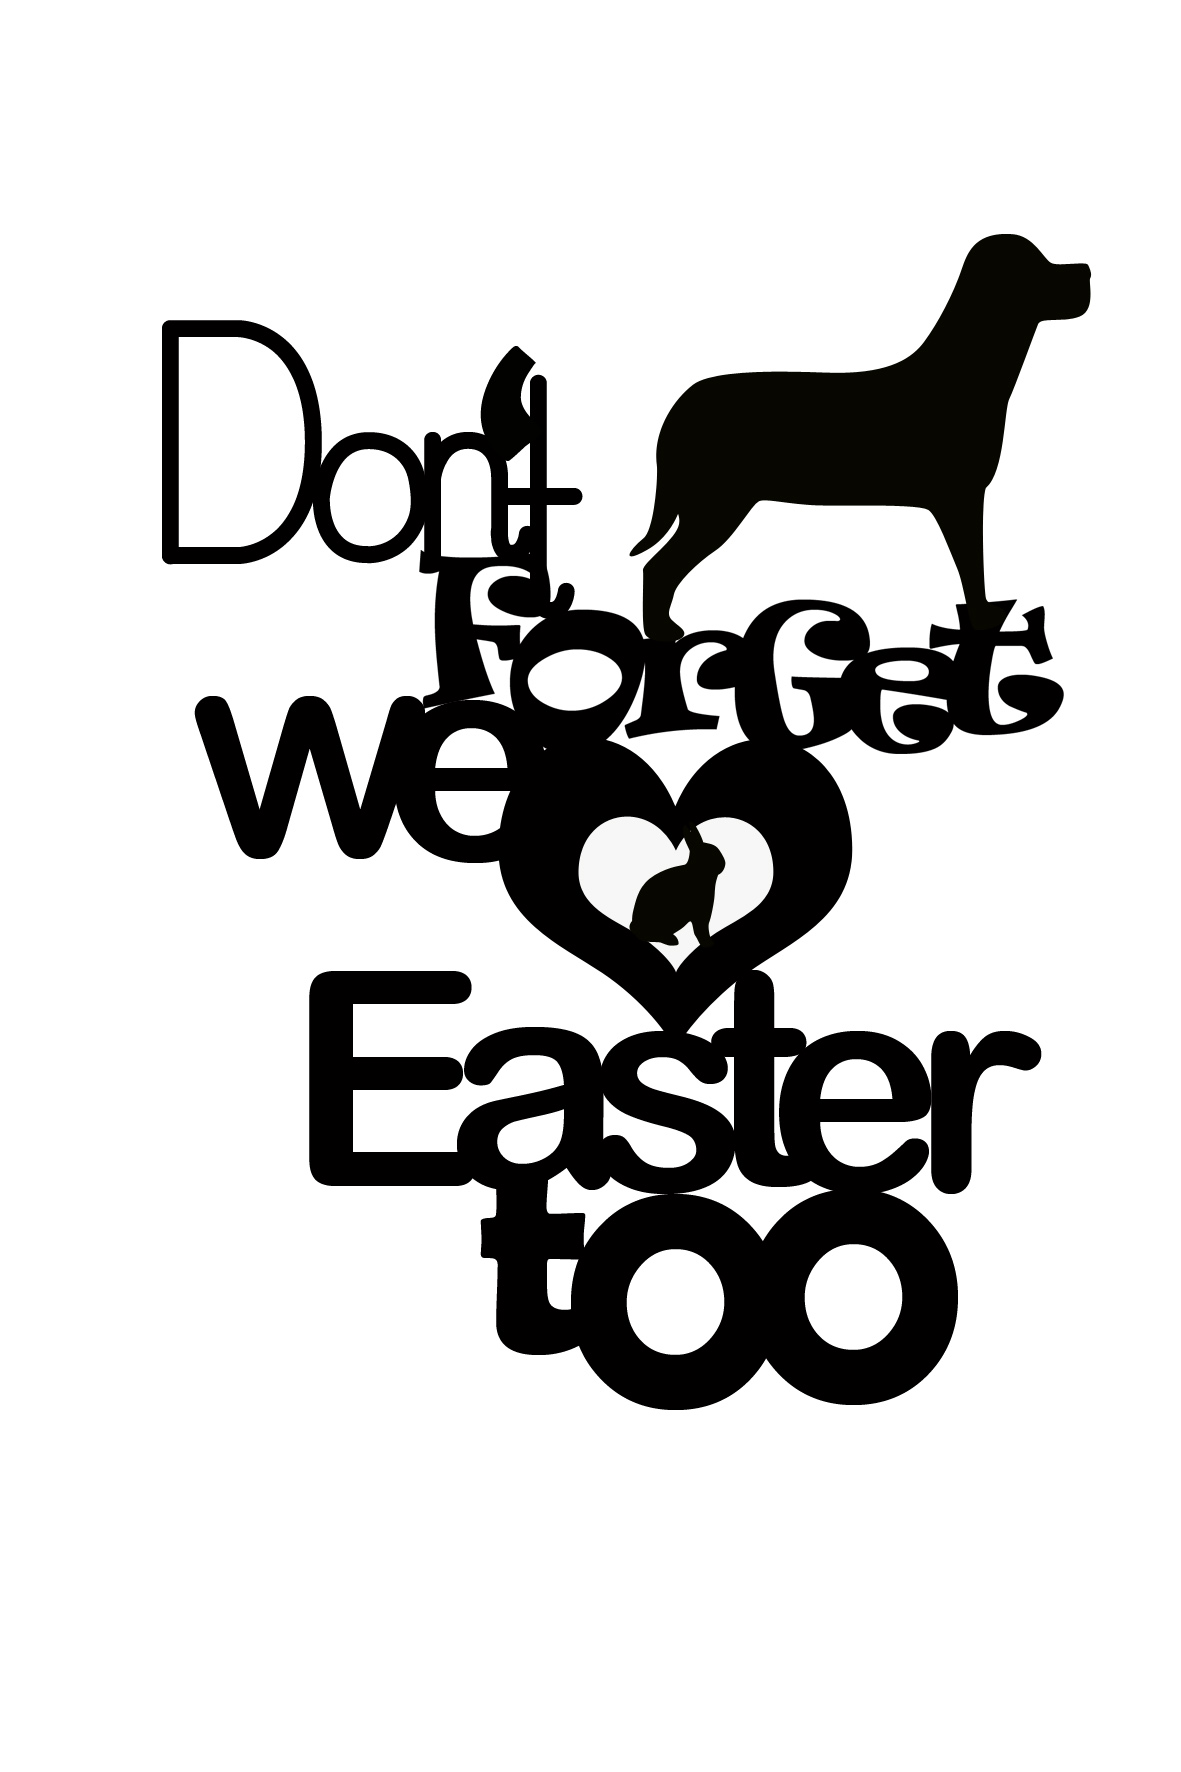 DONT FORGET WE LOVE EASTER TOO dogs 150 x 100 min buy 3